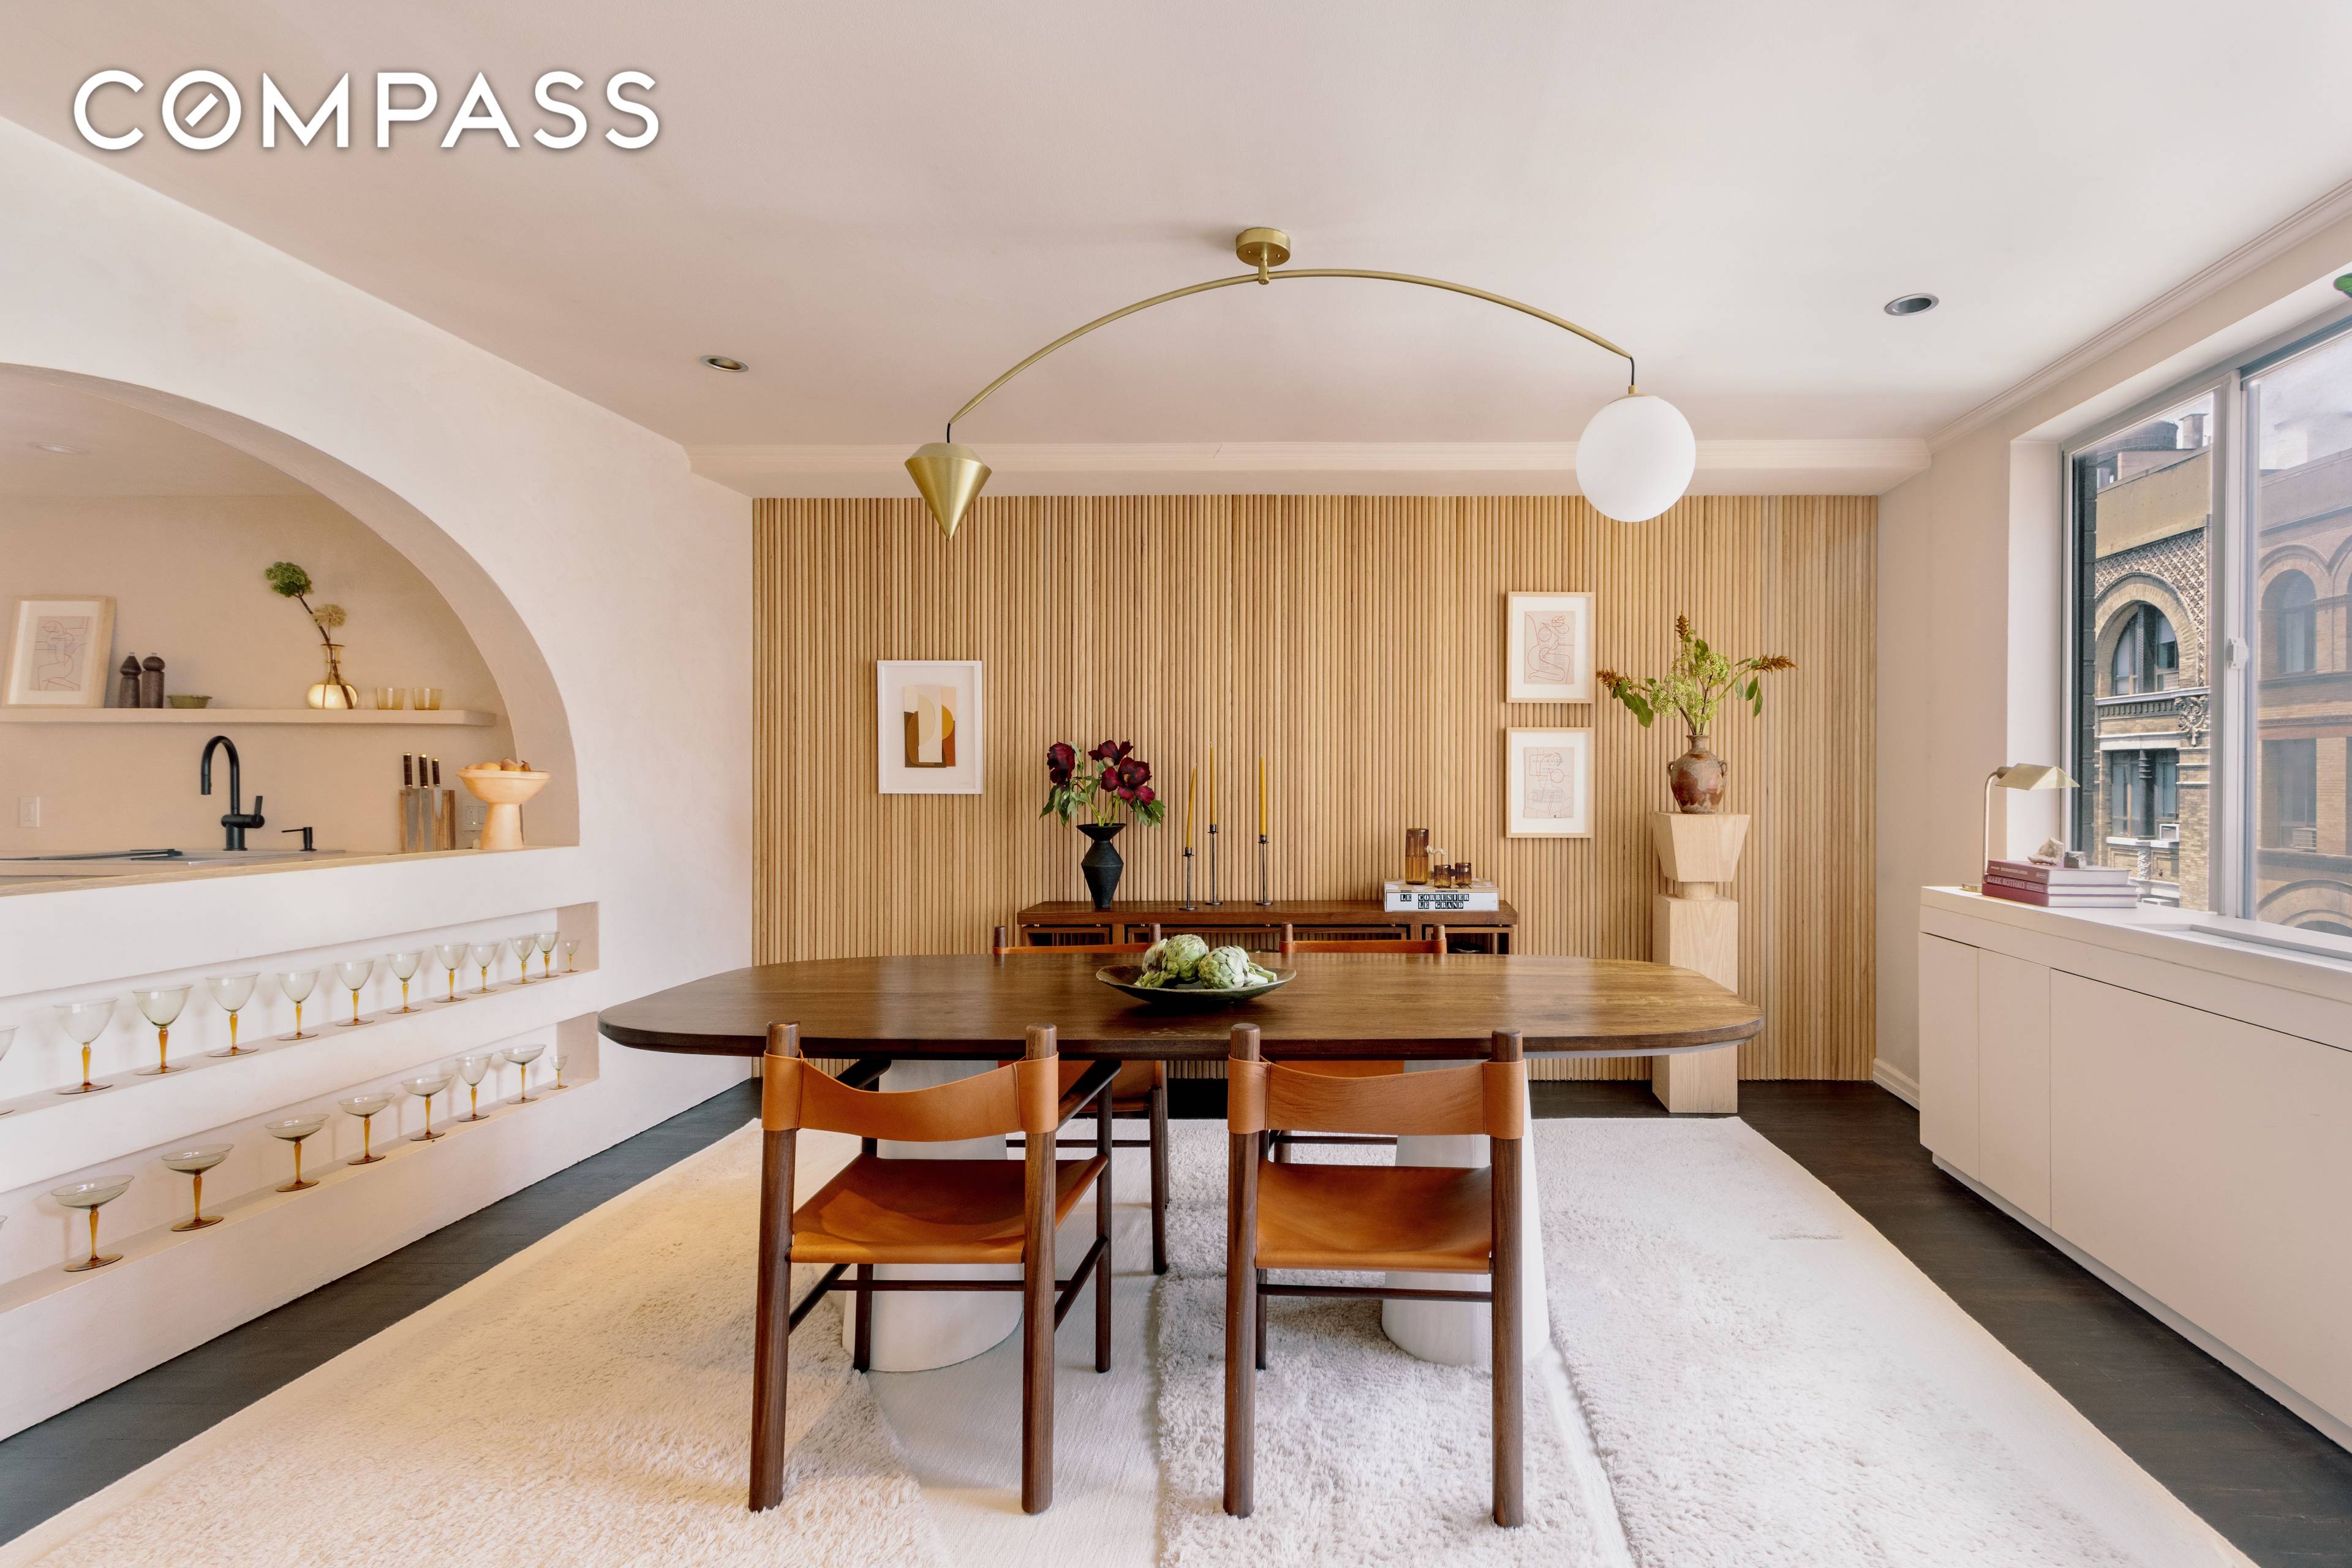 Live in a vacation. Featured in the New York Post 44 East 12th Street, a stunning Mediterranean style penthouse residence located in the heart of Greenwich Village.